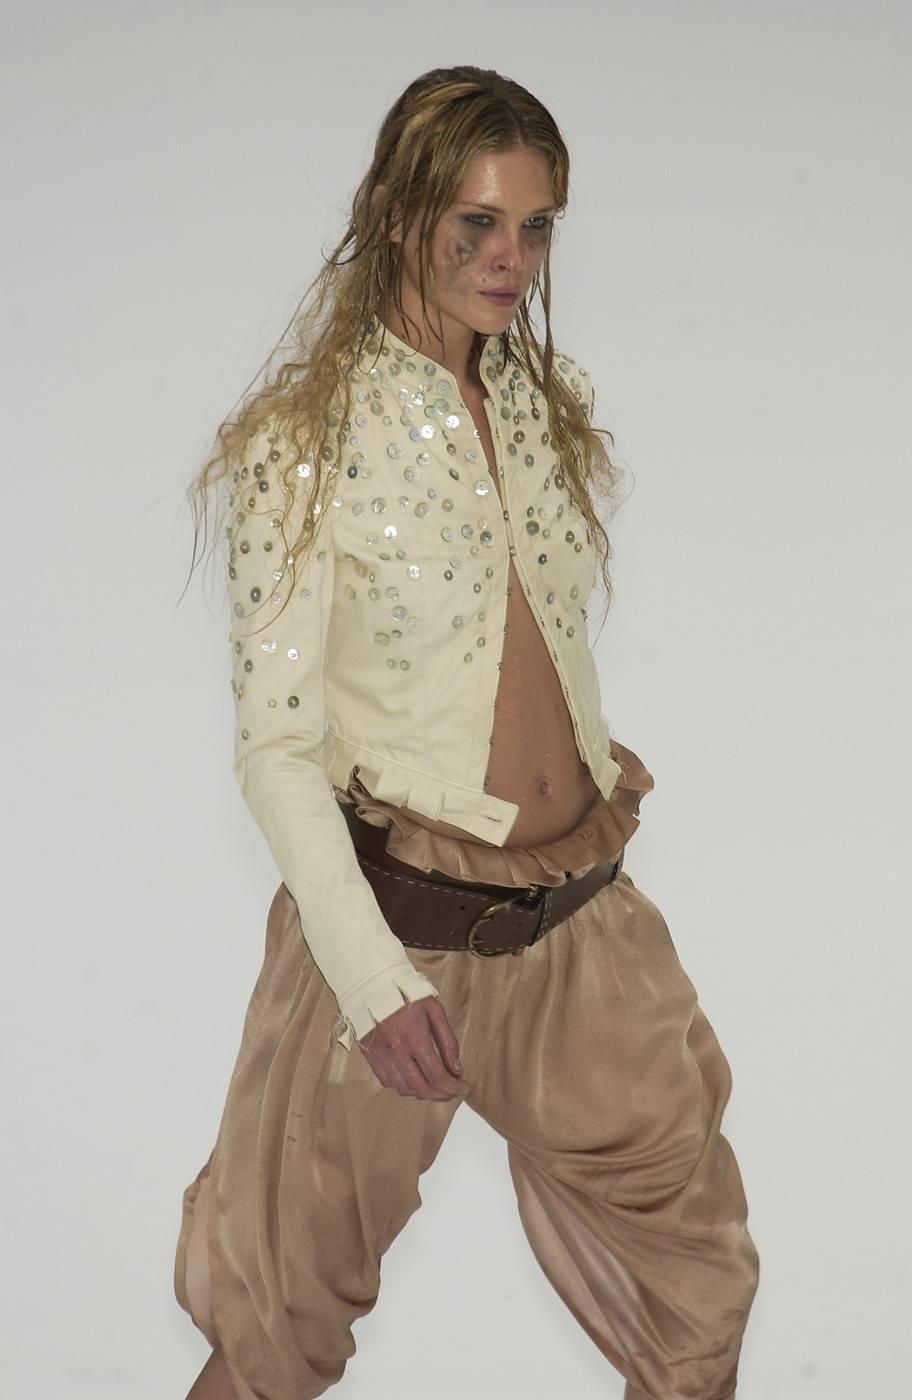 Alexander McQueen ivory cotton jacket with decorative mother of pearl buttons

- hook and eye metal closures 

Spring-Summer 2003